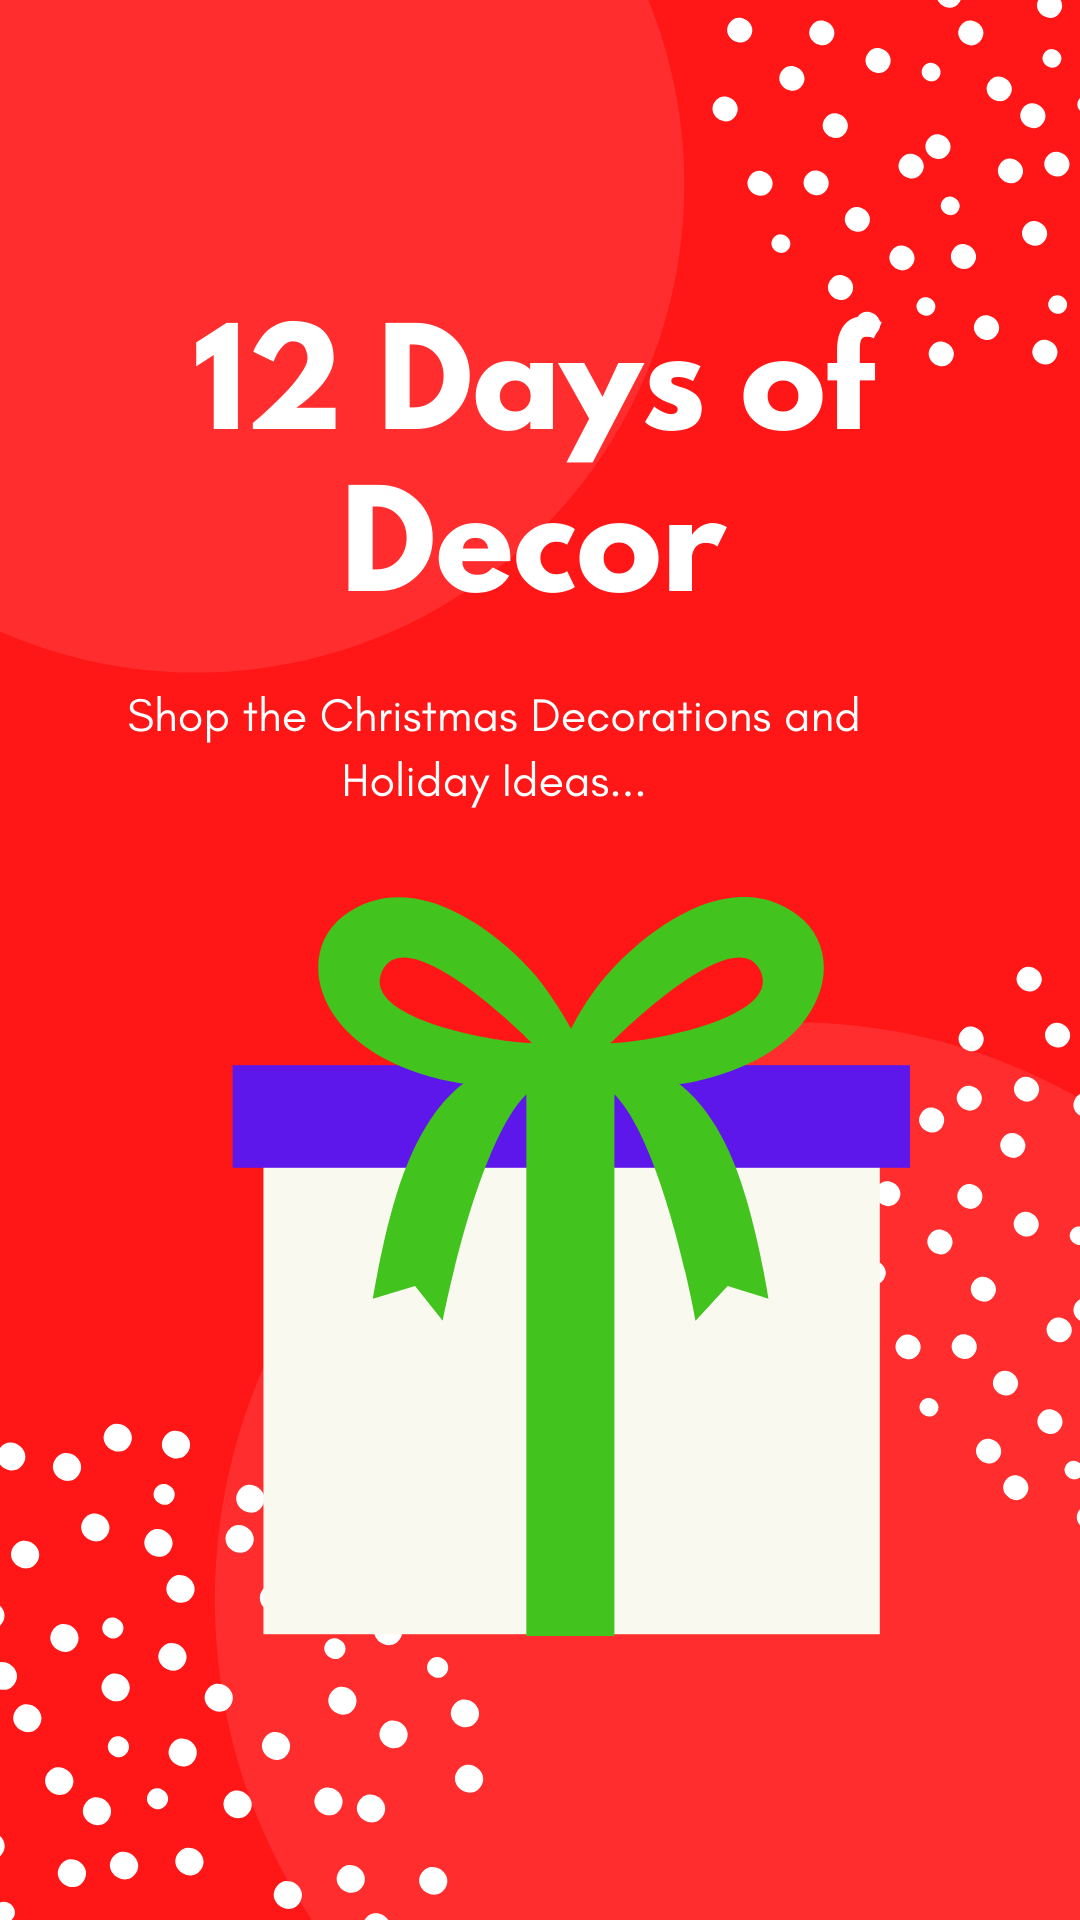 Shop for the holidays with the 12 days of ideas for decoration your home